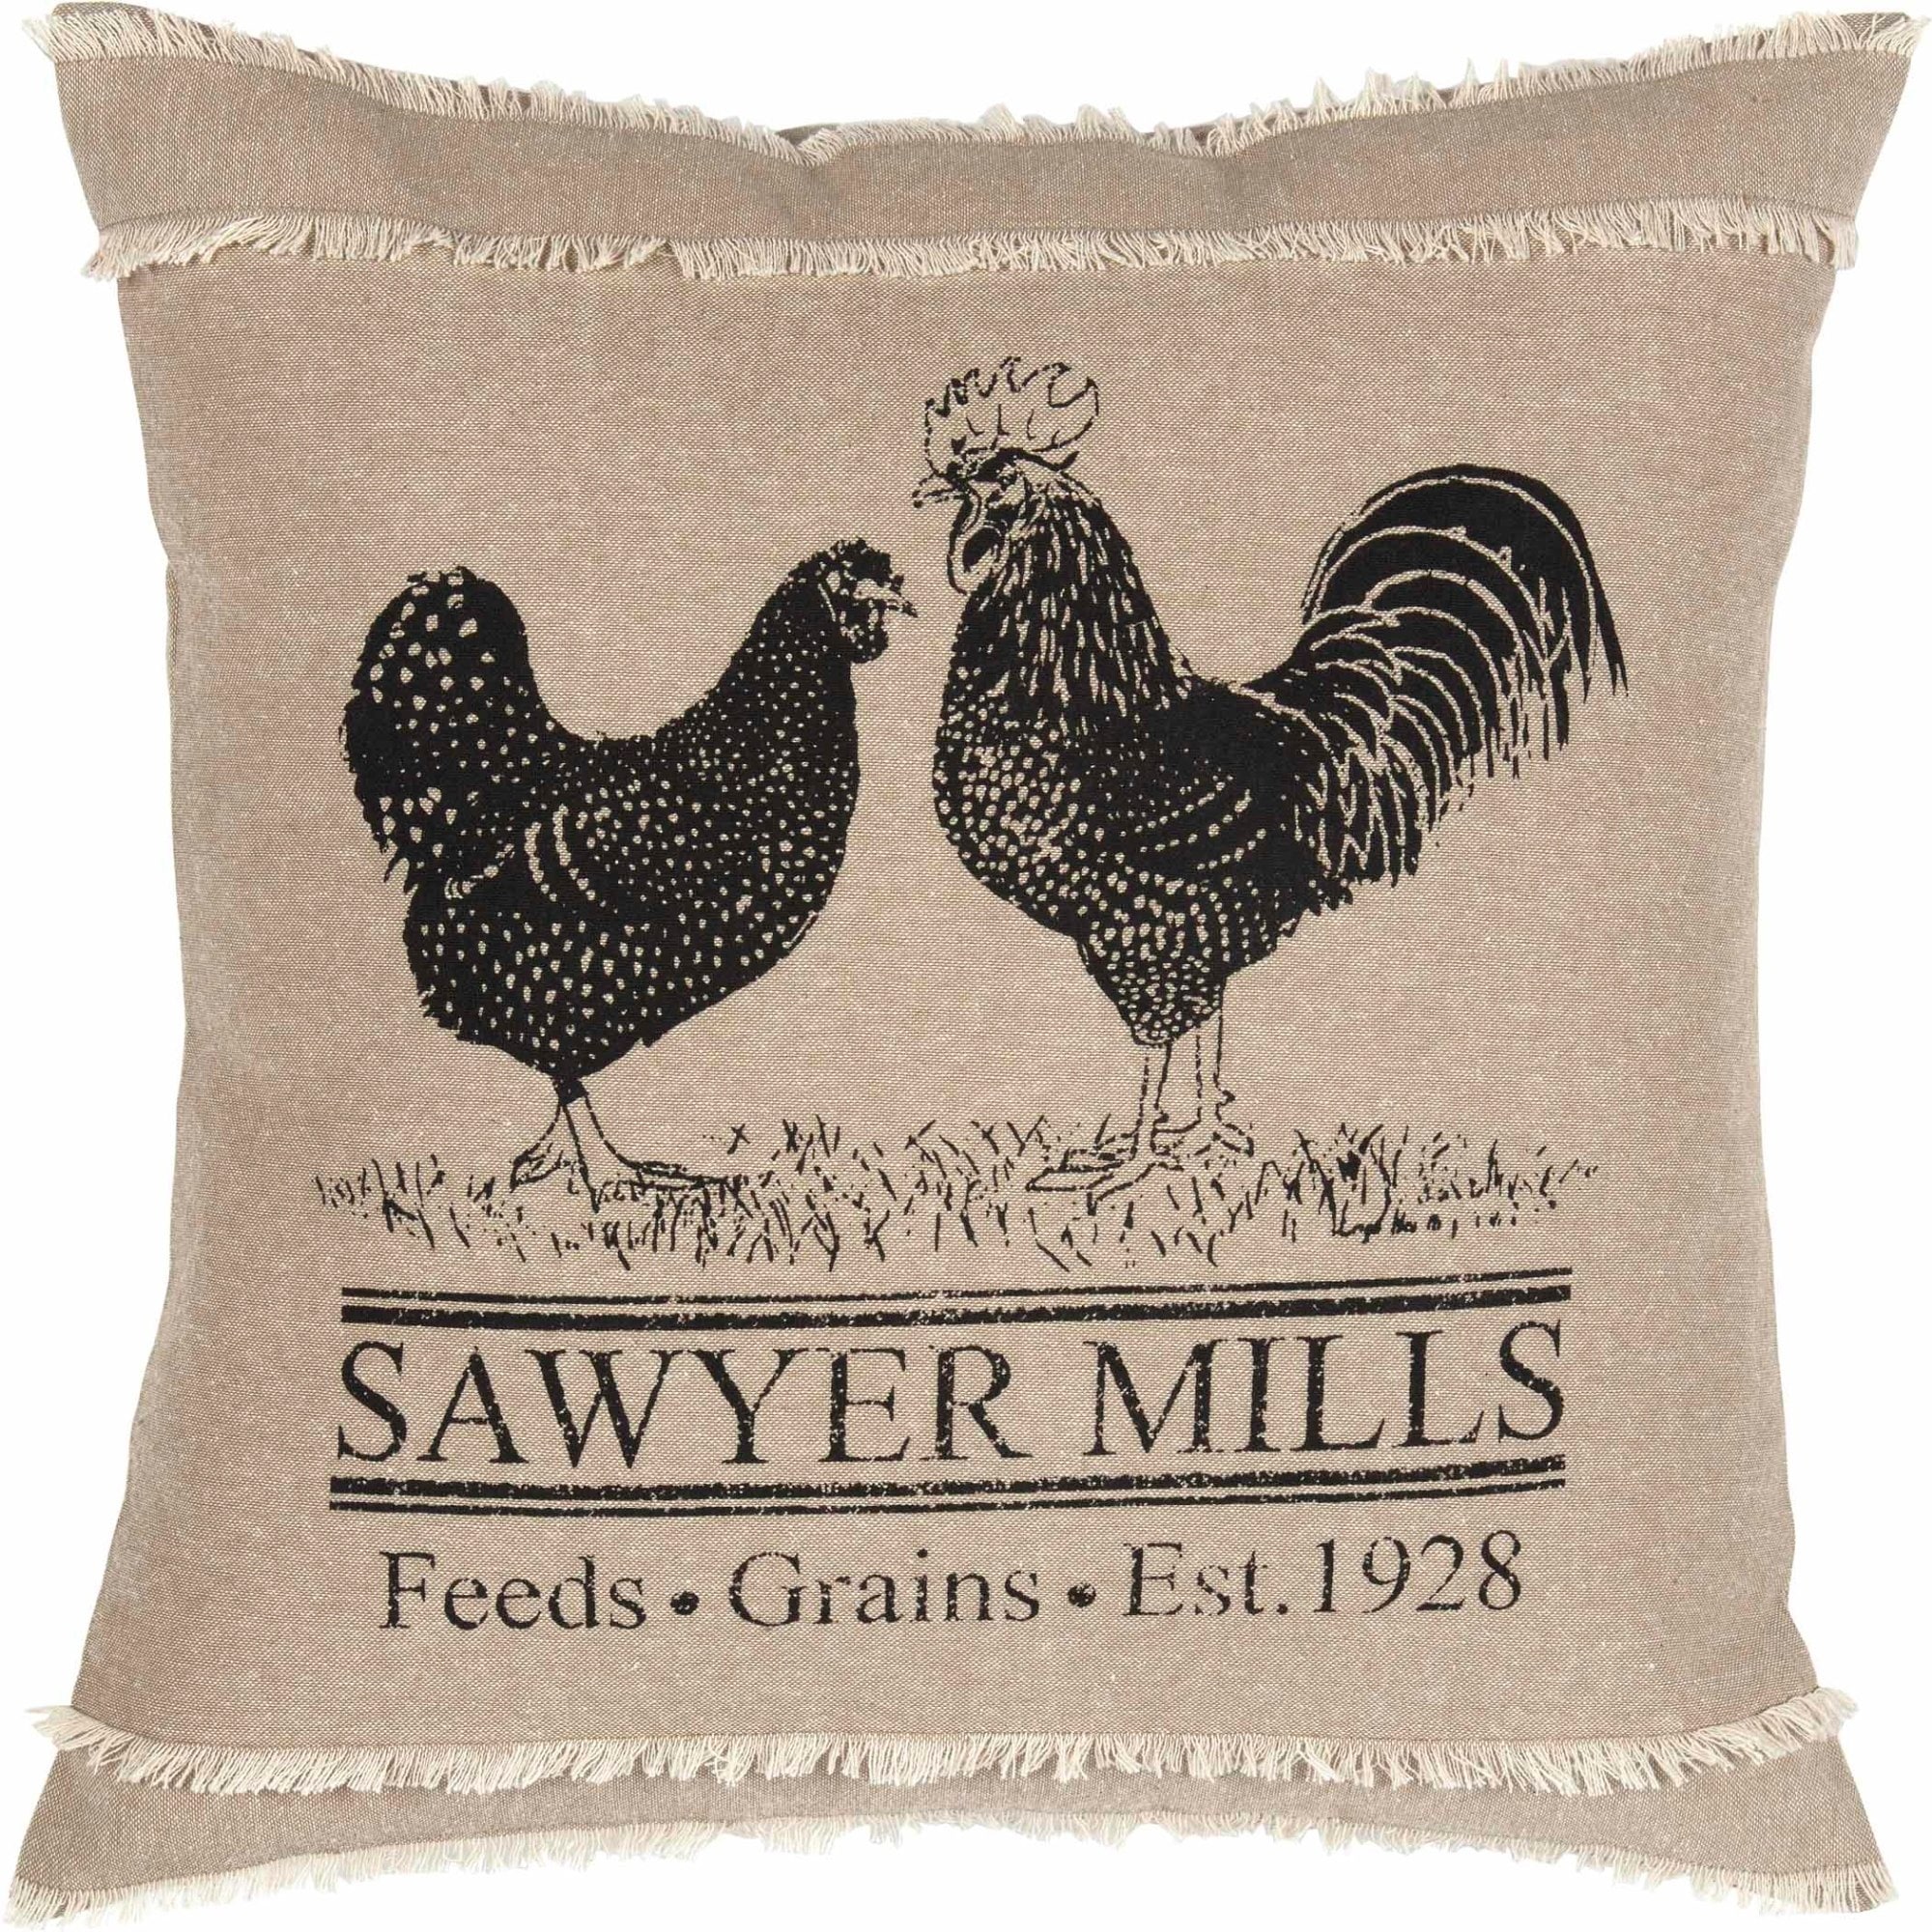 https://ak1.ostkcdn.com/images/products/is/images/direct/d9fa1b7c44c0d54935dc02e13618861d6786cfa5/Sawyer-Mill-Charcoal-Poultry-Pillow-18x18.jpg